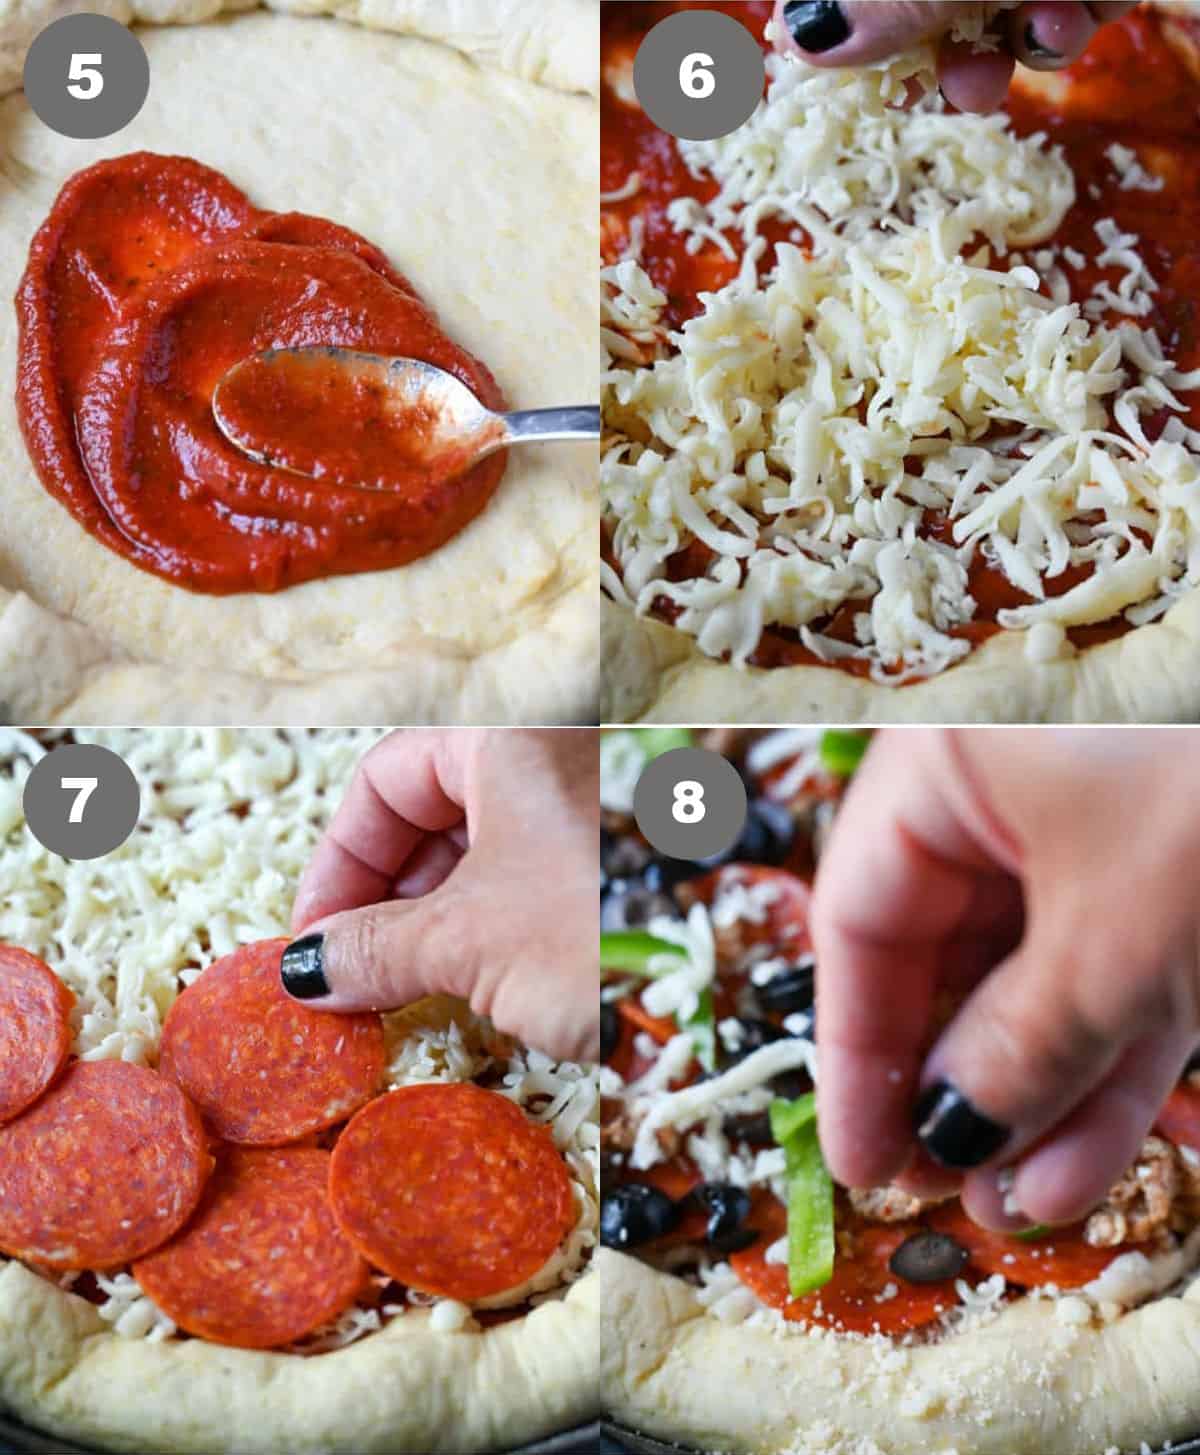 Sauce being spread on the pizza then cheese and toppings.